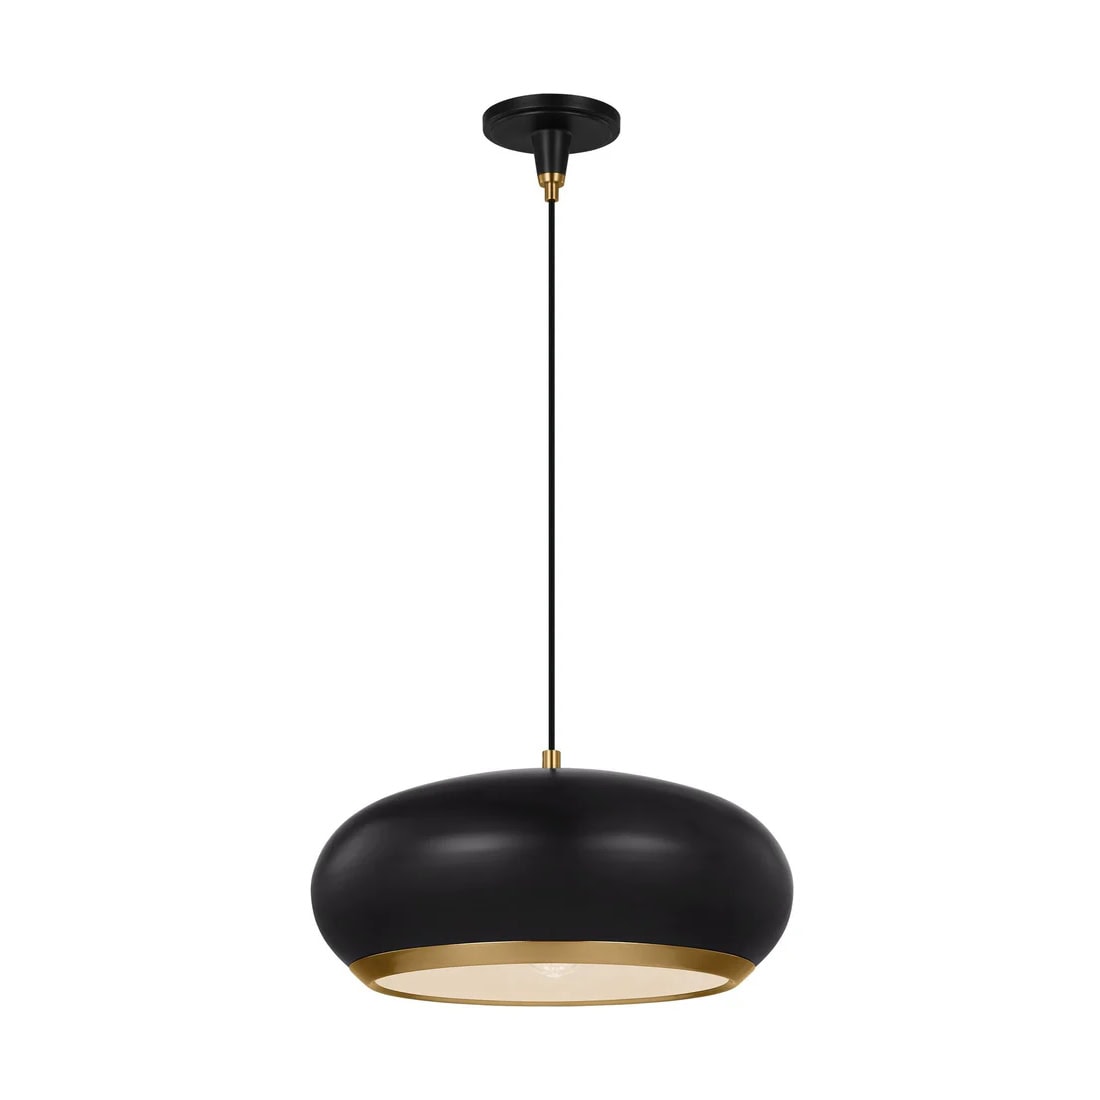 Product image of Clasica Pendant 450mm Black and Brass